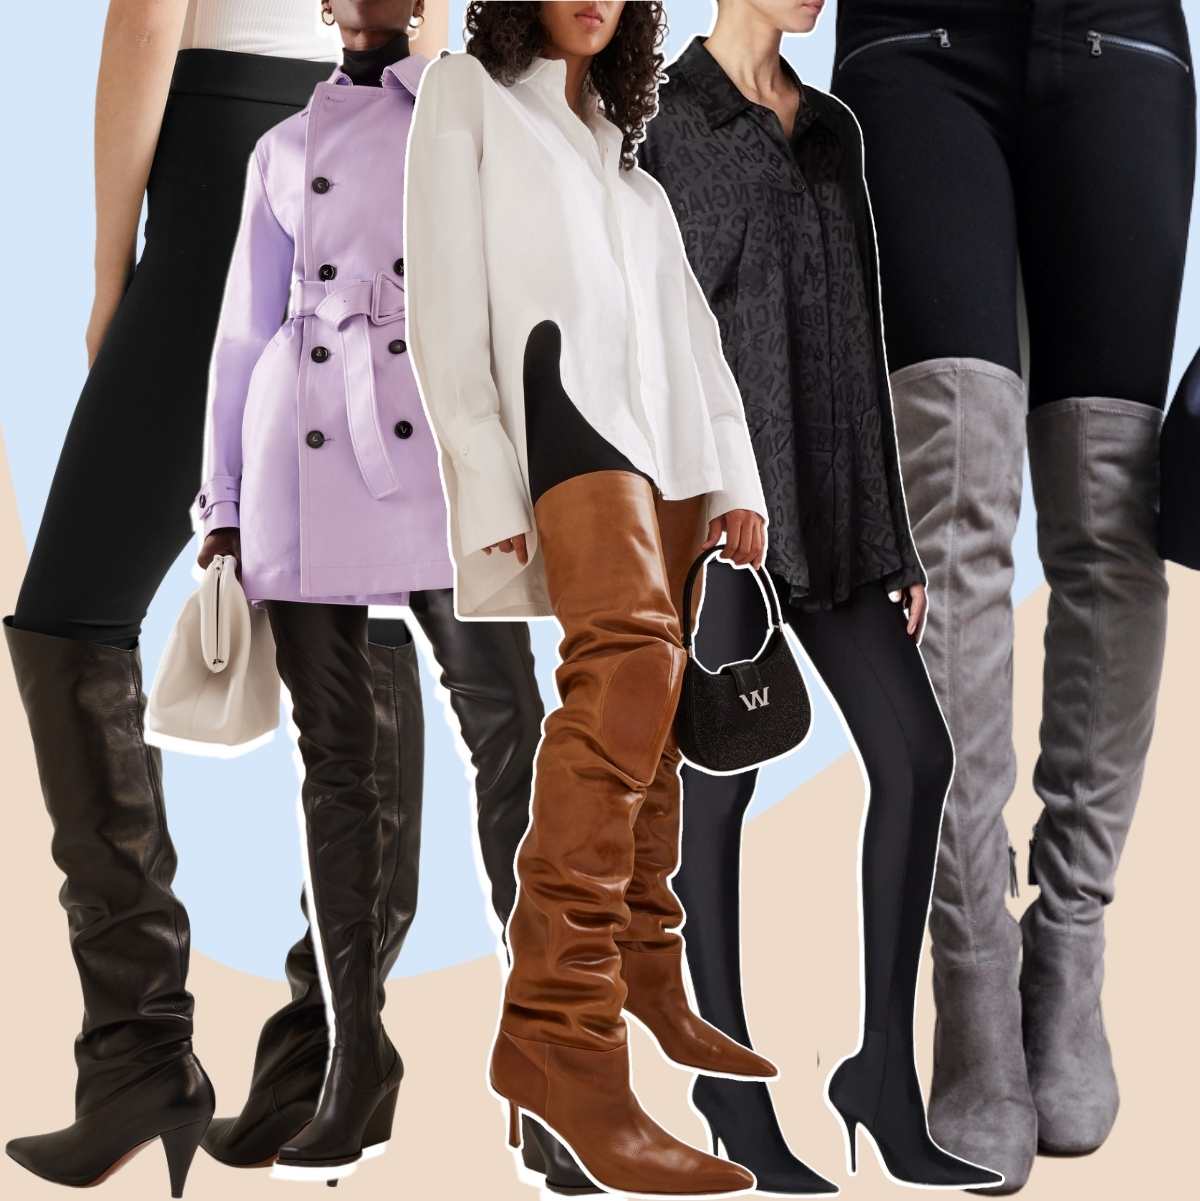 How To Wear Thigh High Boots Outfits Over 35 Styling Ideas! | atelier ...